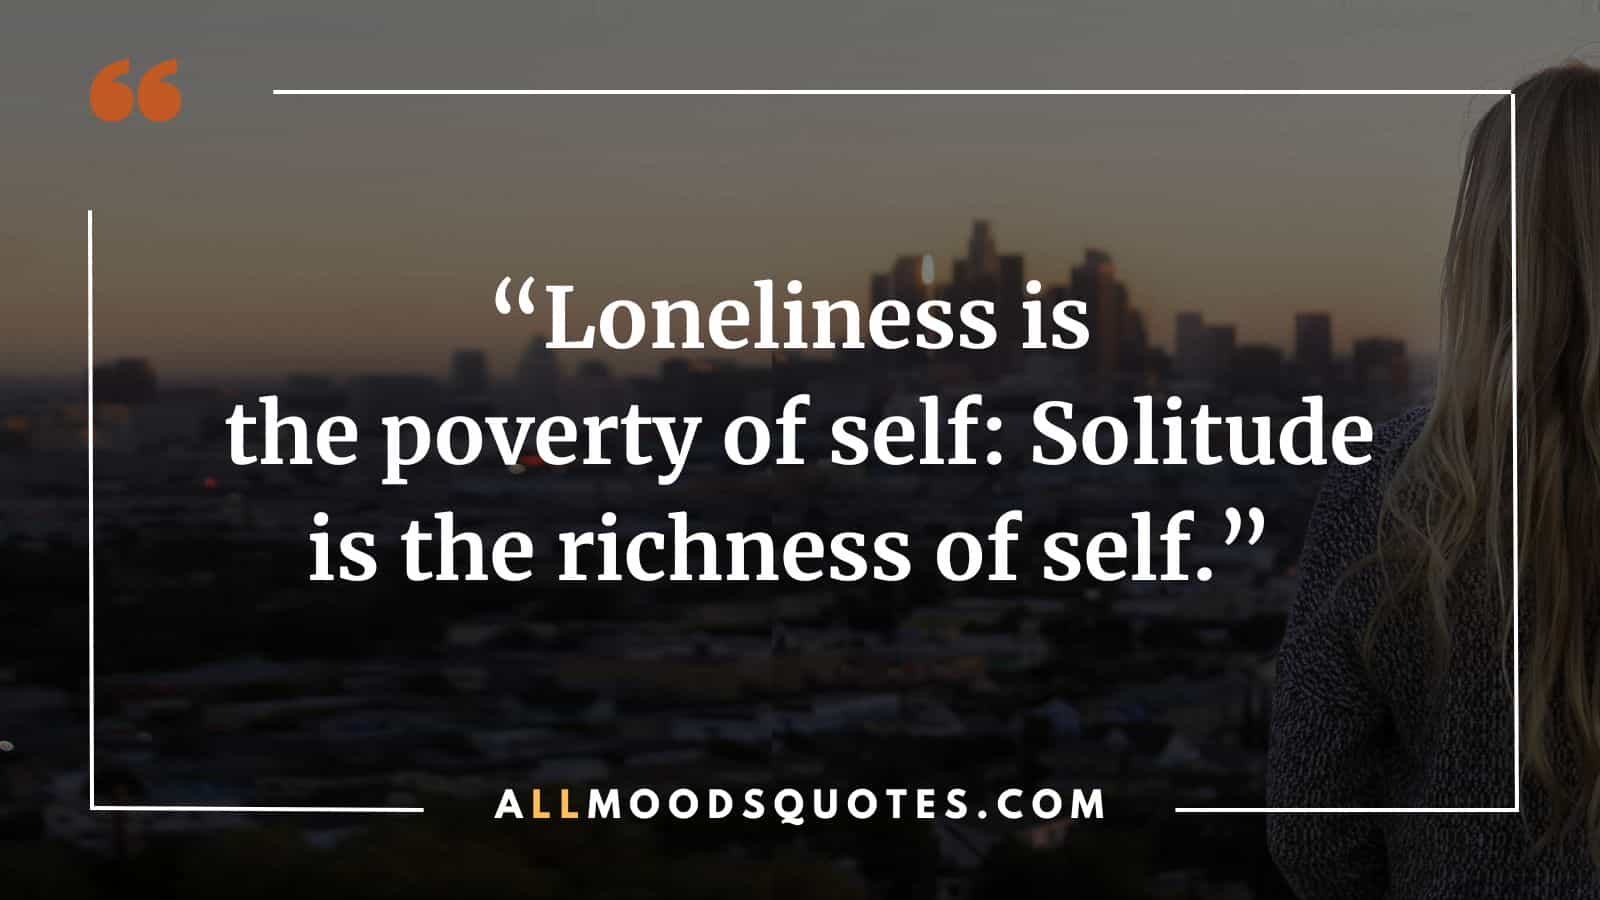 Loneliness is the poverty of self: Solitude is the richness of self.